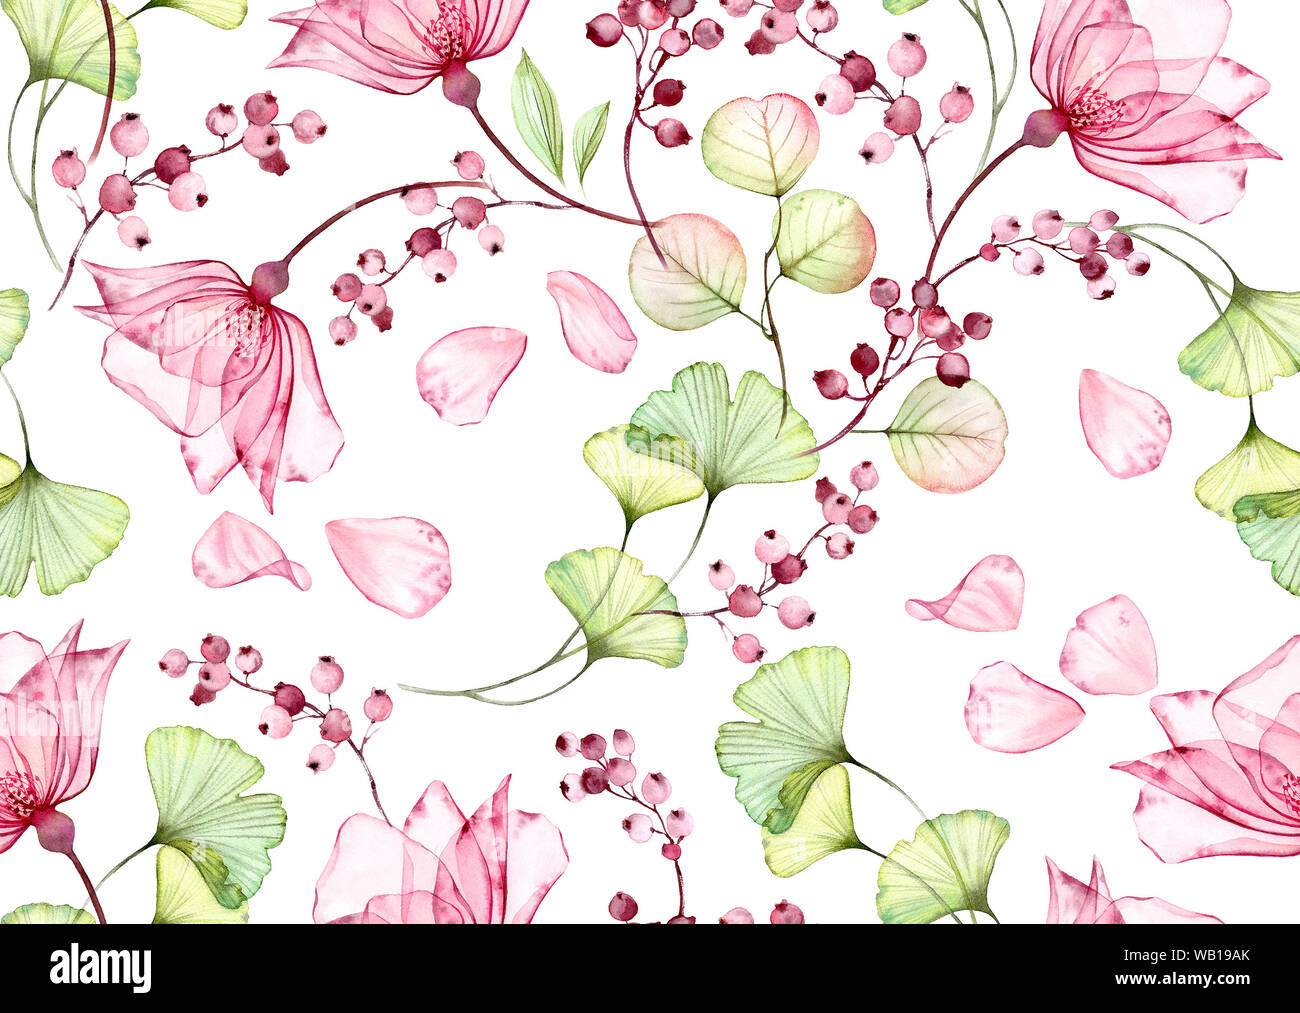 Transparent watercolor rose. Seamless floral pattern. Isolated hand drawn  with flying petals of flowers, eucalyptus and berries for wallpaper design  Stock Photo - Alamy